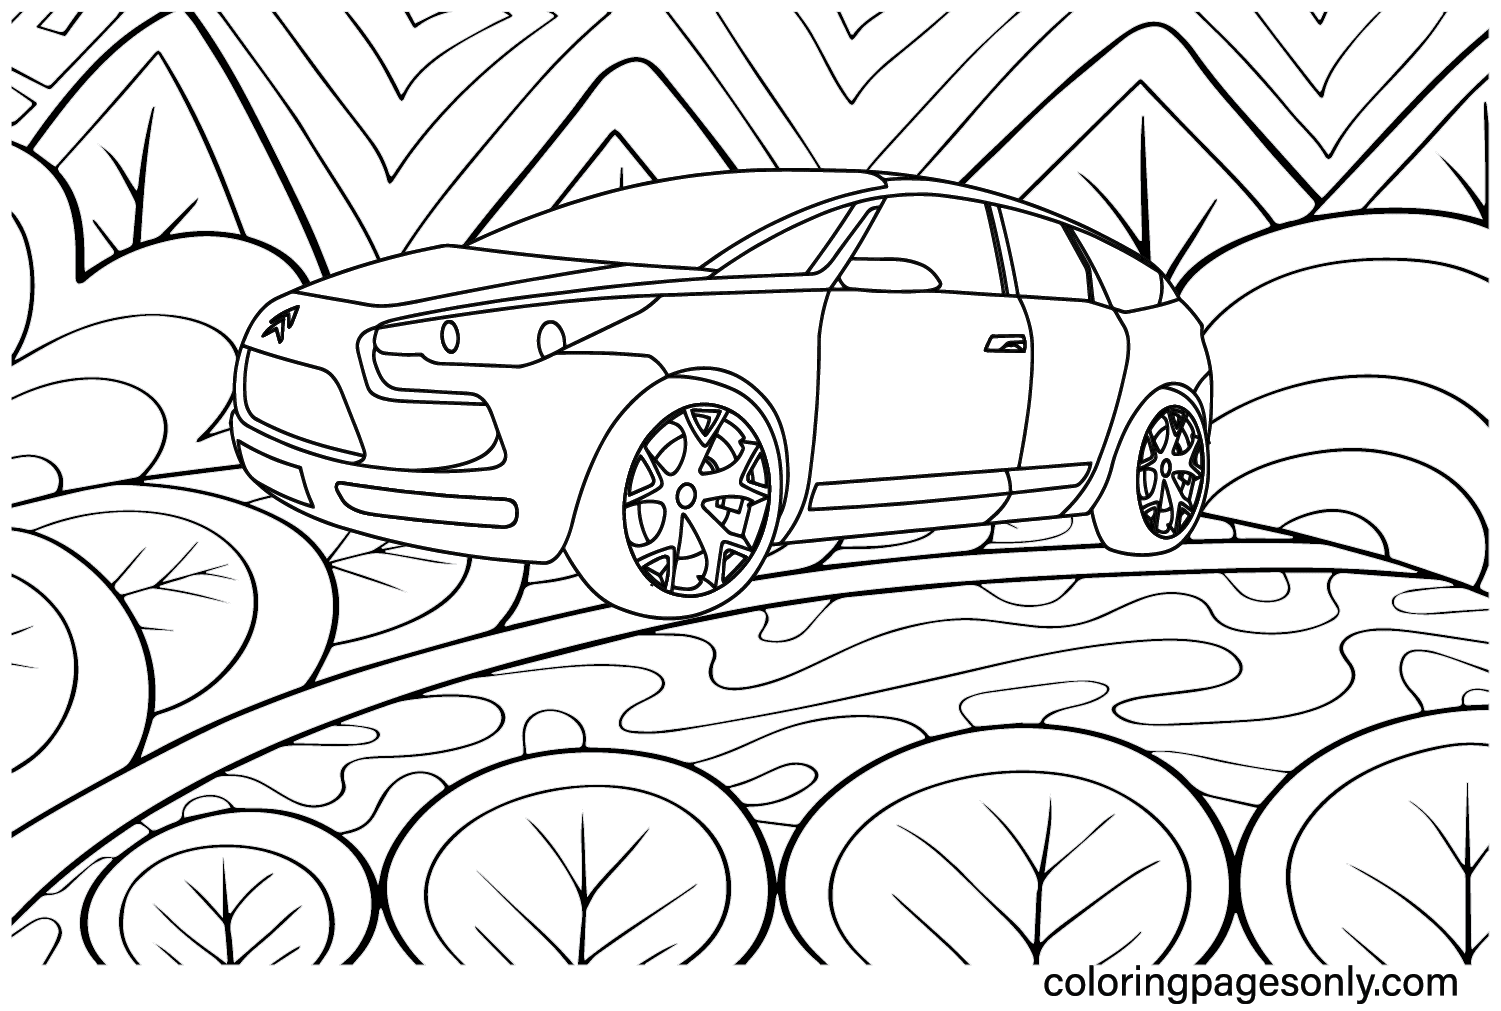 Citroën C4 Picasso Coloring Page - Free Printable Coloring Pages